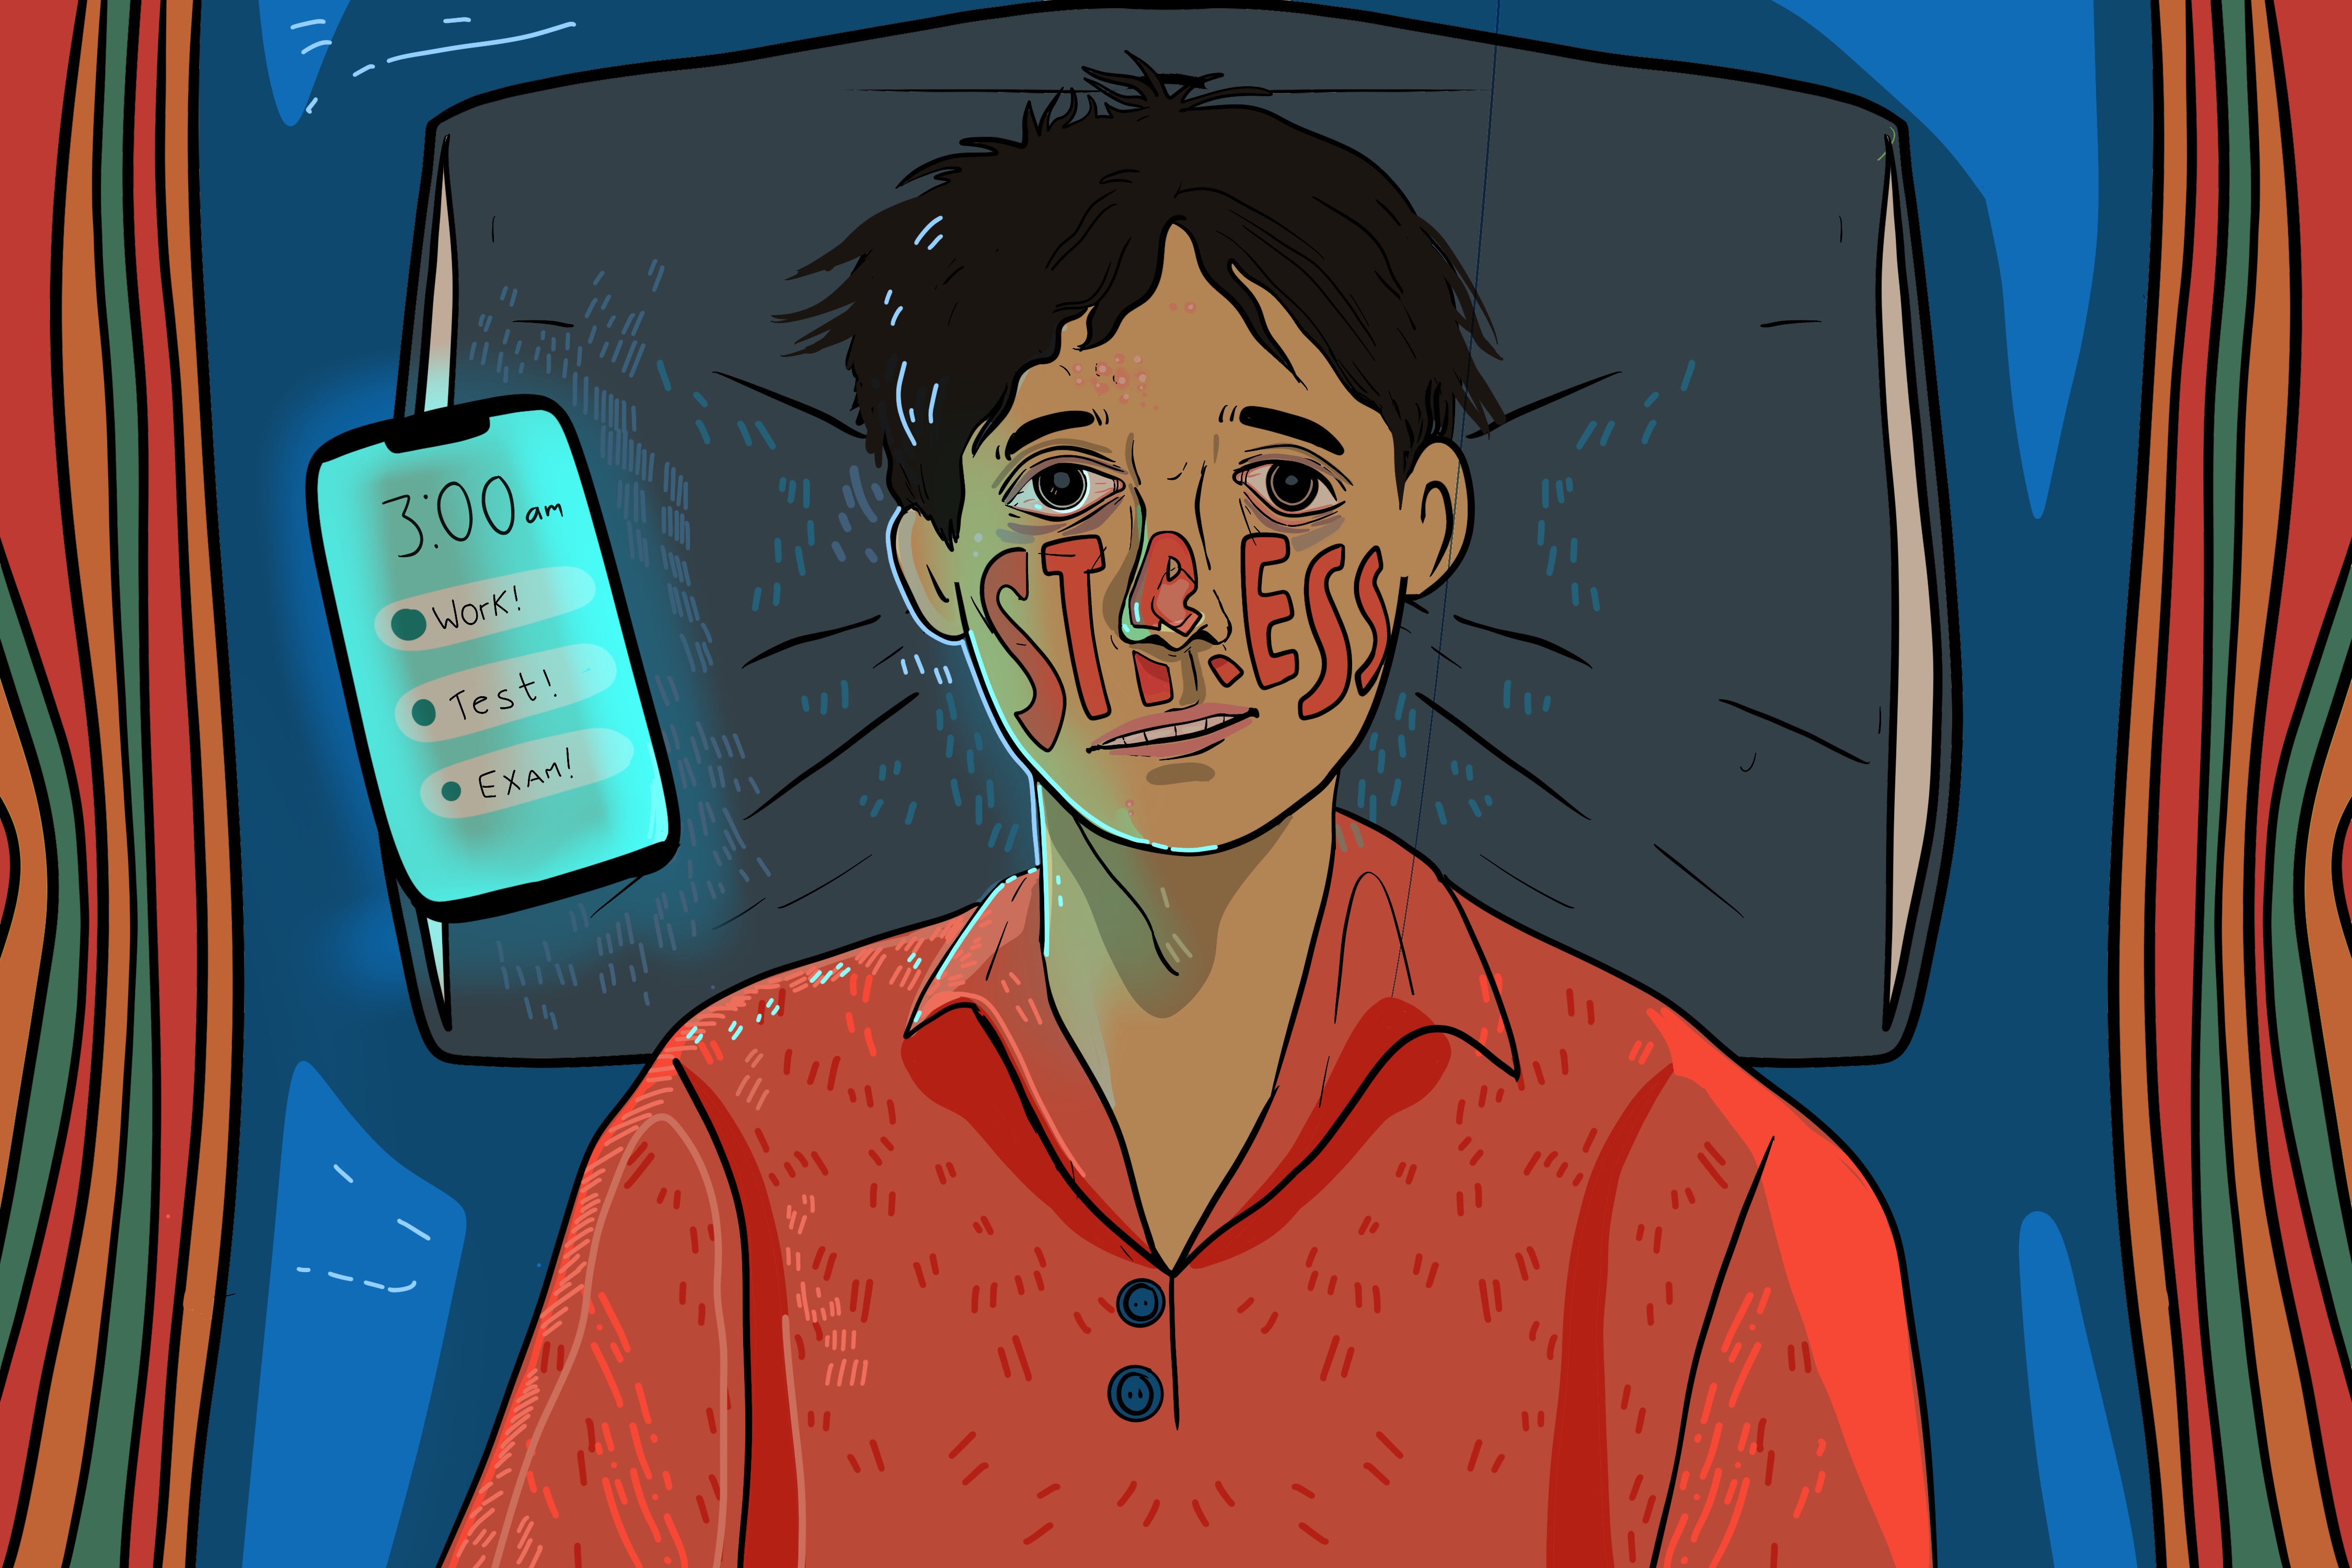 Experts explain that often insomnia and stress are related issues. Person in bed with stress across their face, phone beside them shows it is 3:00 a.m. [Graphic by Sara Mizannojehdehi]